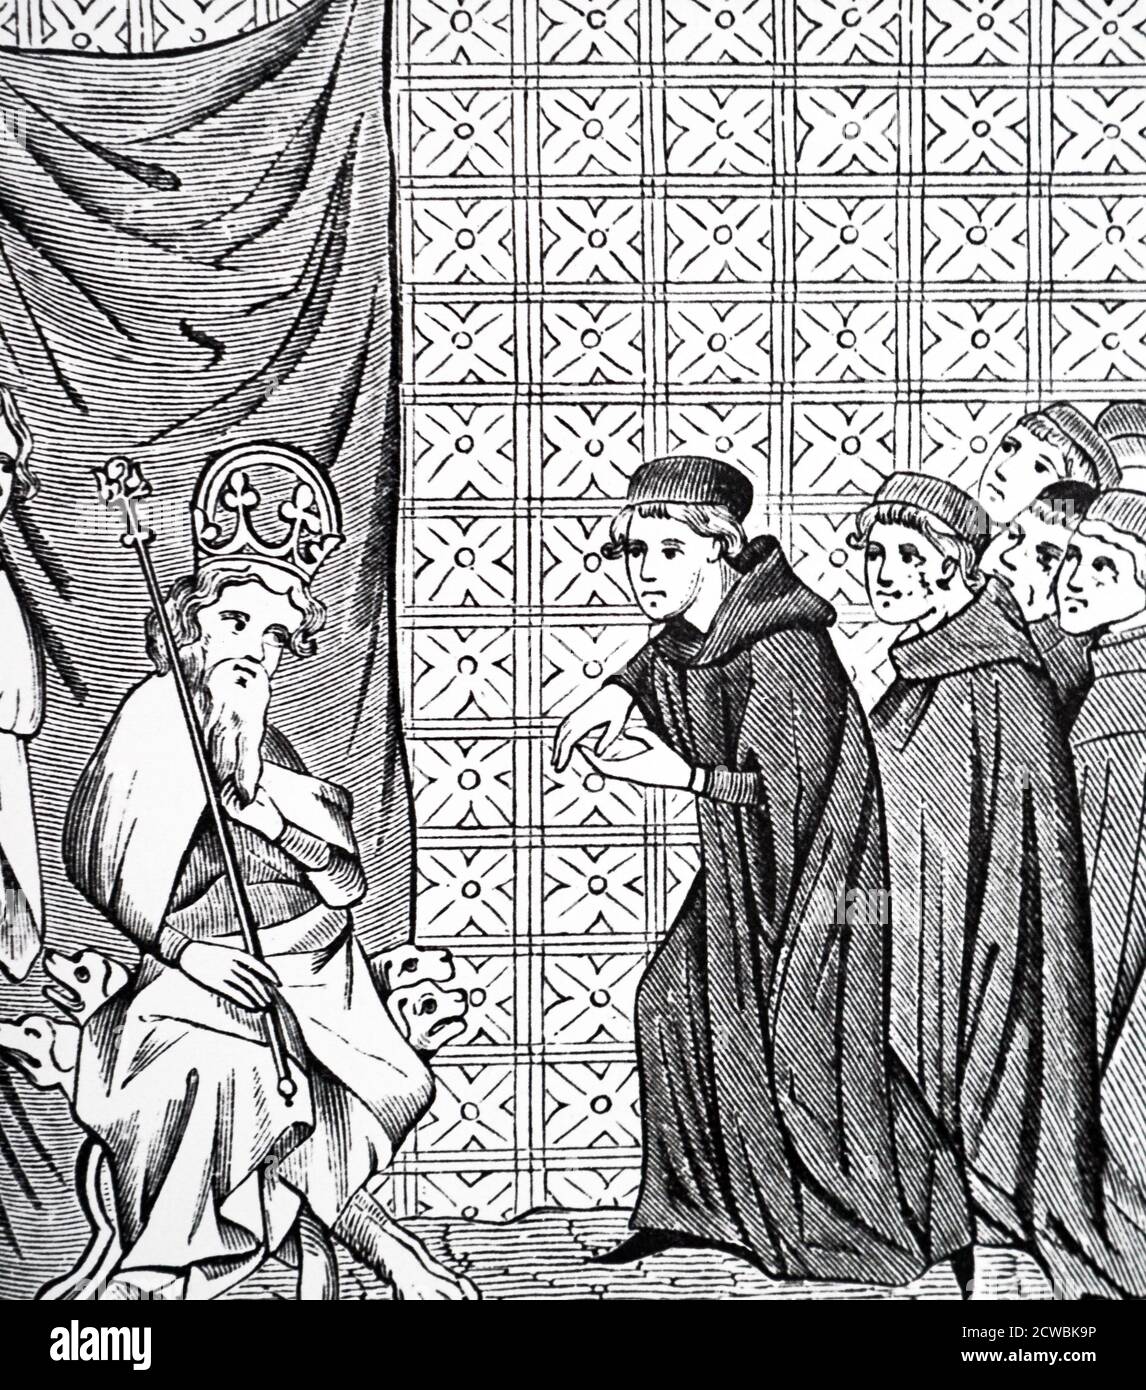 Woodcut engraving depicting Emperor Charles IV (1316-1378) being harangued by Fellows of Paris University. Engraving after manuscript 'Chroniques de St Denis'. Stock Photo